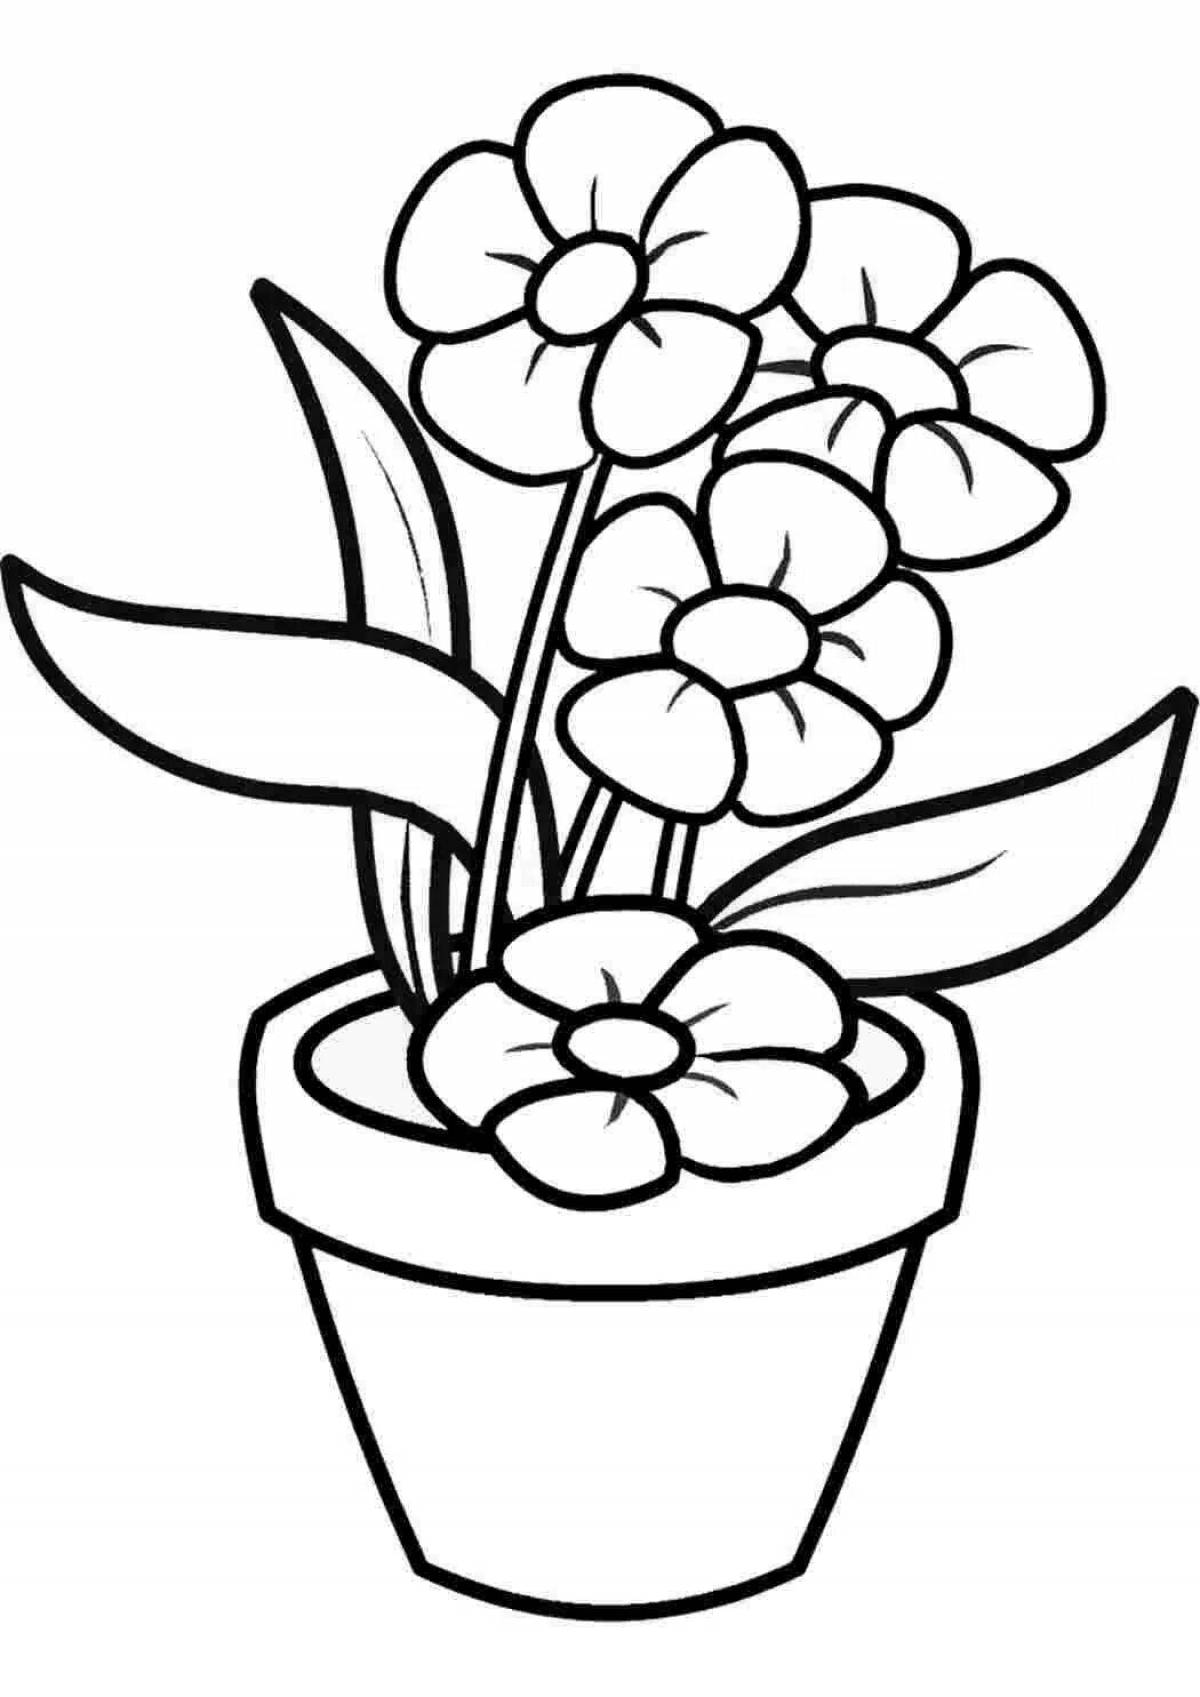 Coloring book magical houseplant for 3-4 year olds